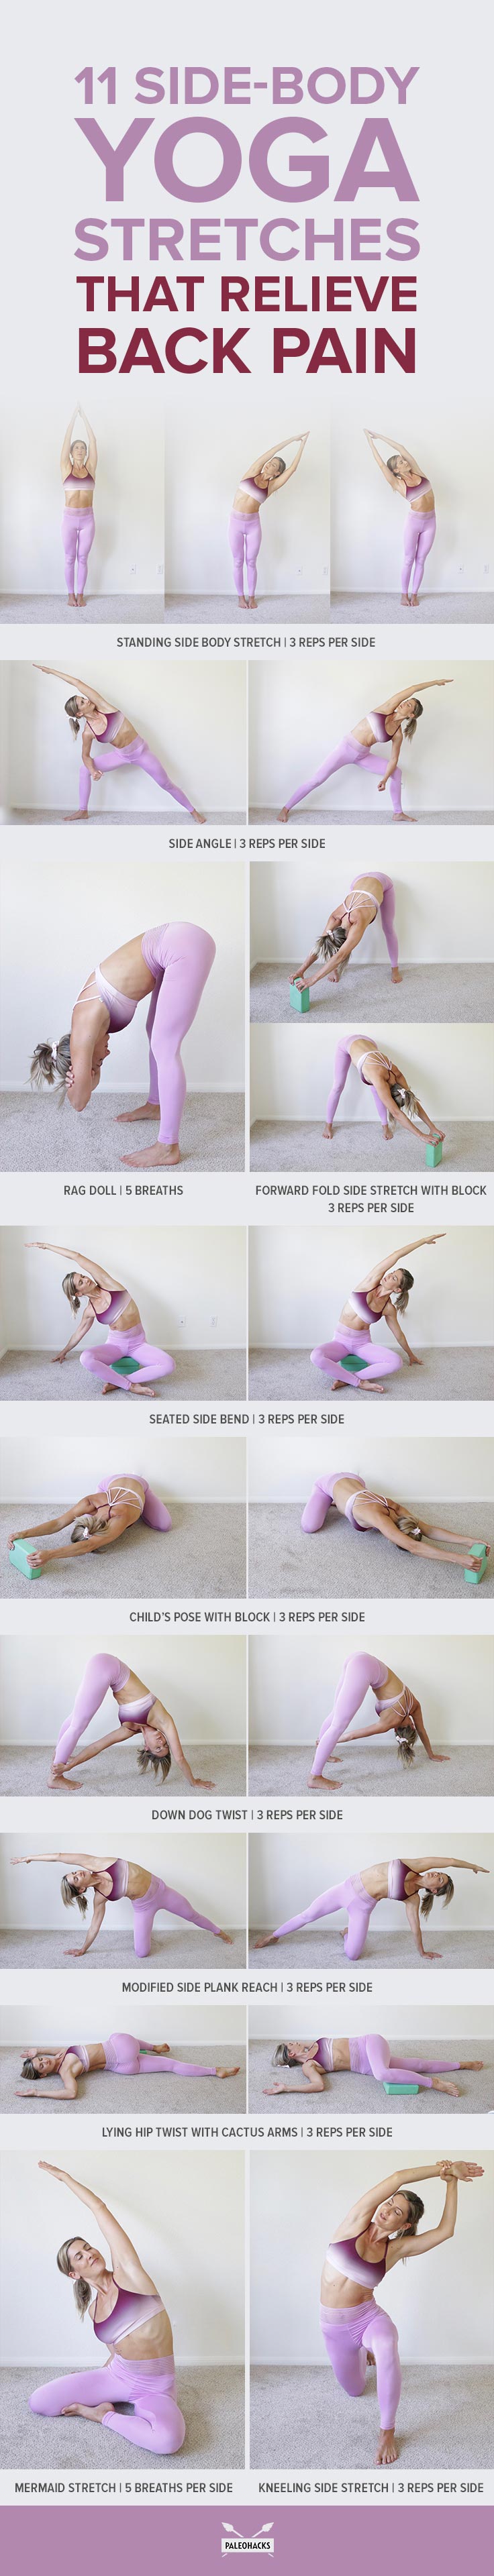 Aching for back pain relief? These 11 side-body stretches will help you feel brand new again. You can do this routine daily, or at least once per week.